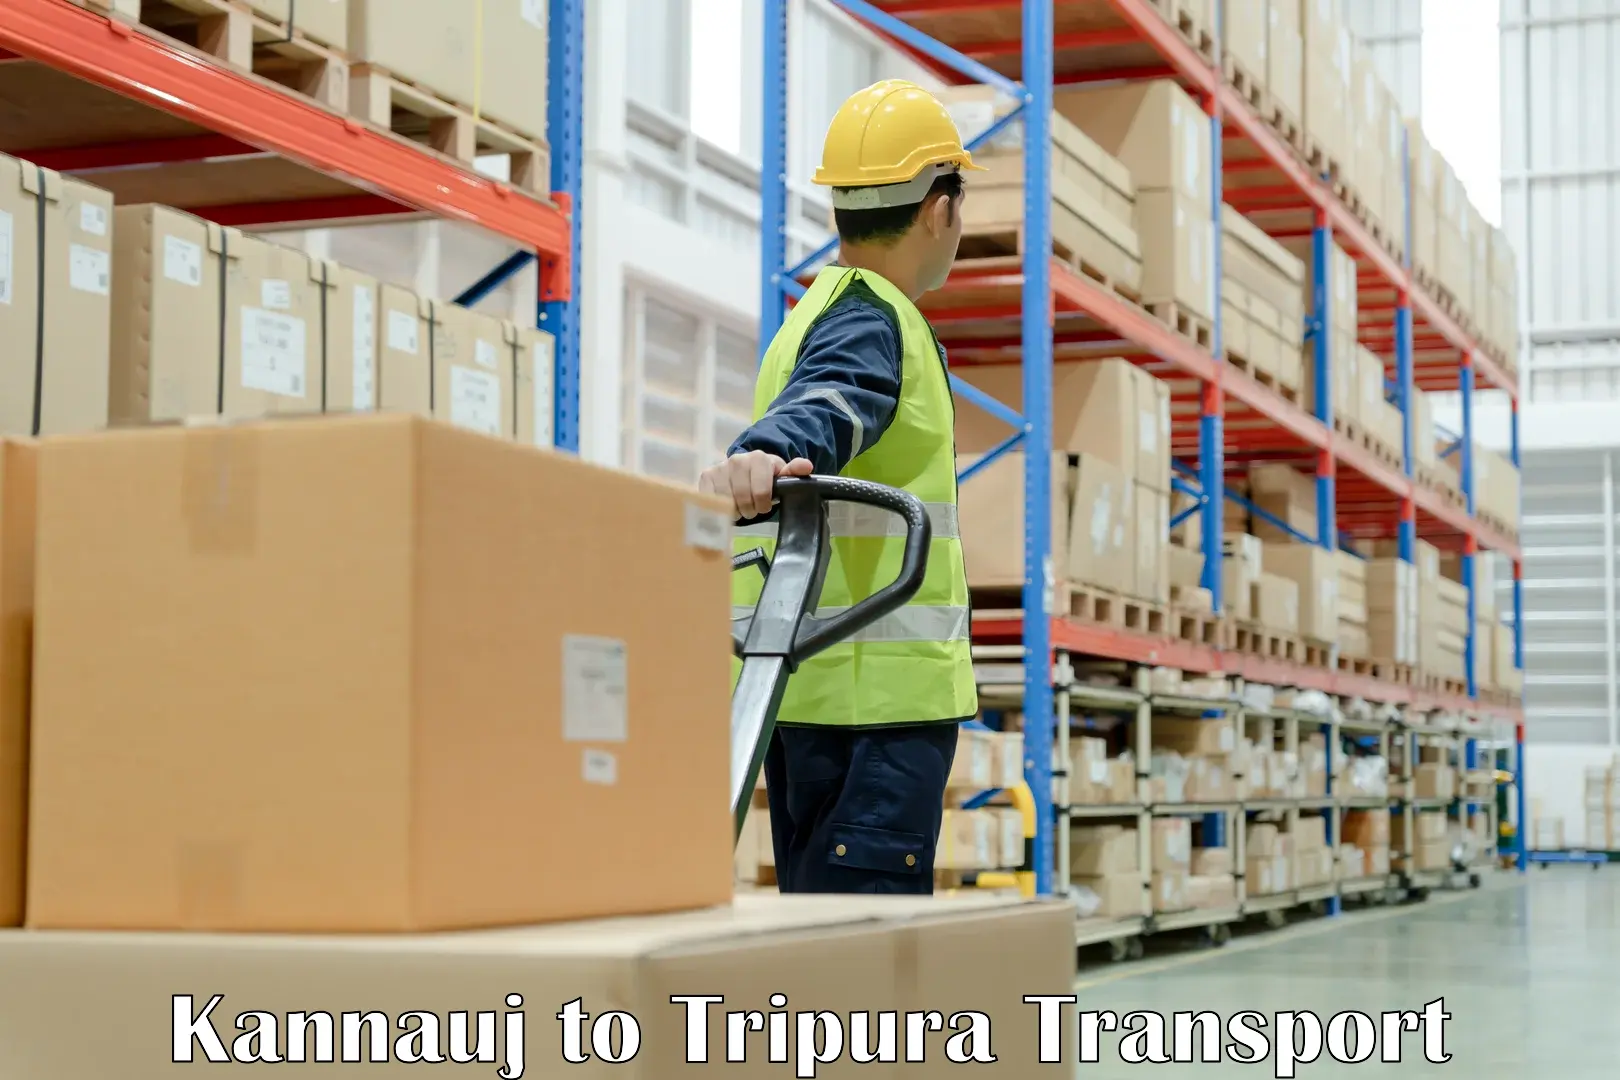 Vehicle transport services in Kannauj to West Tripura